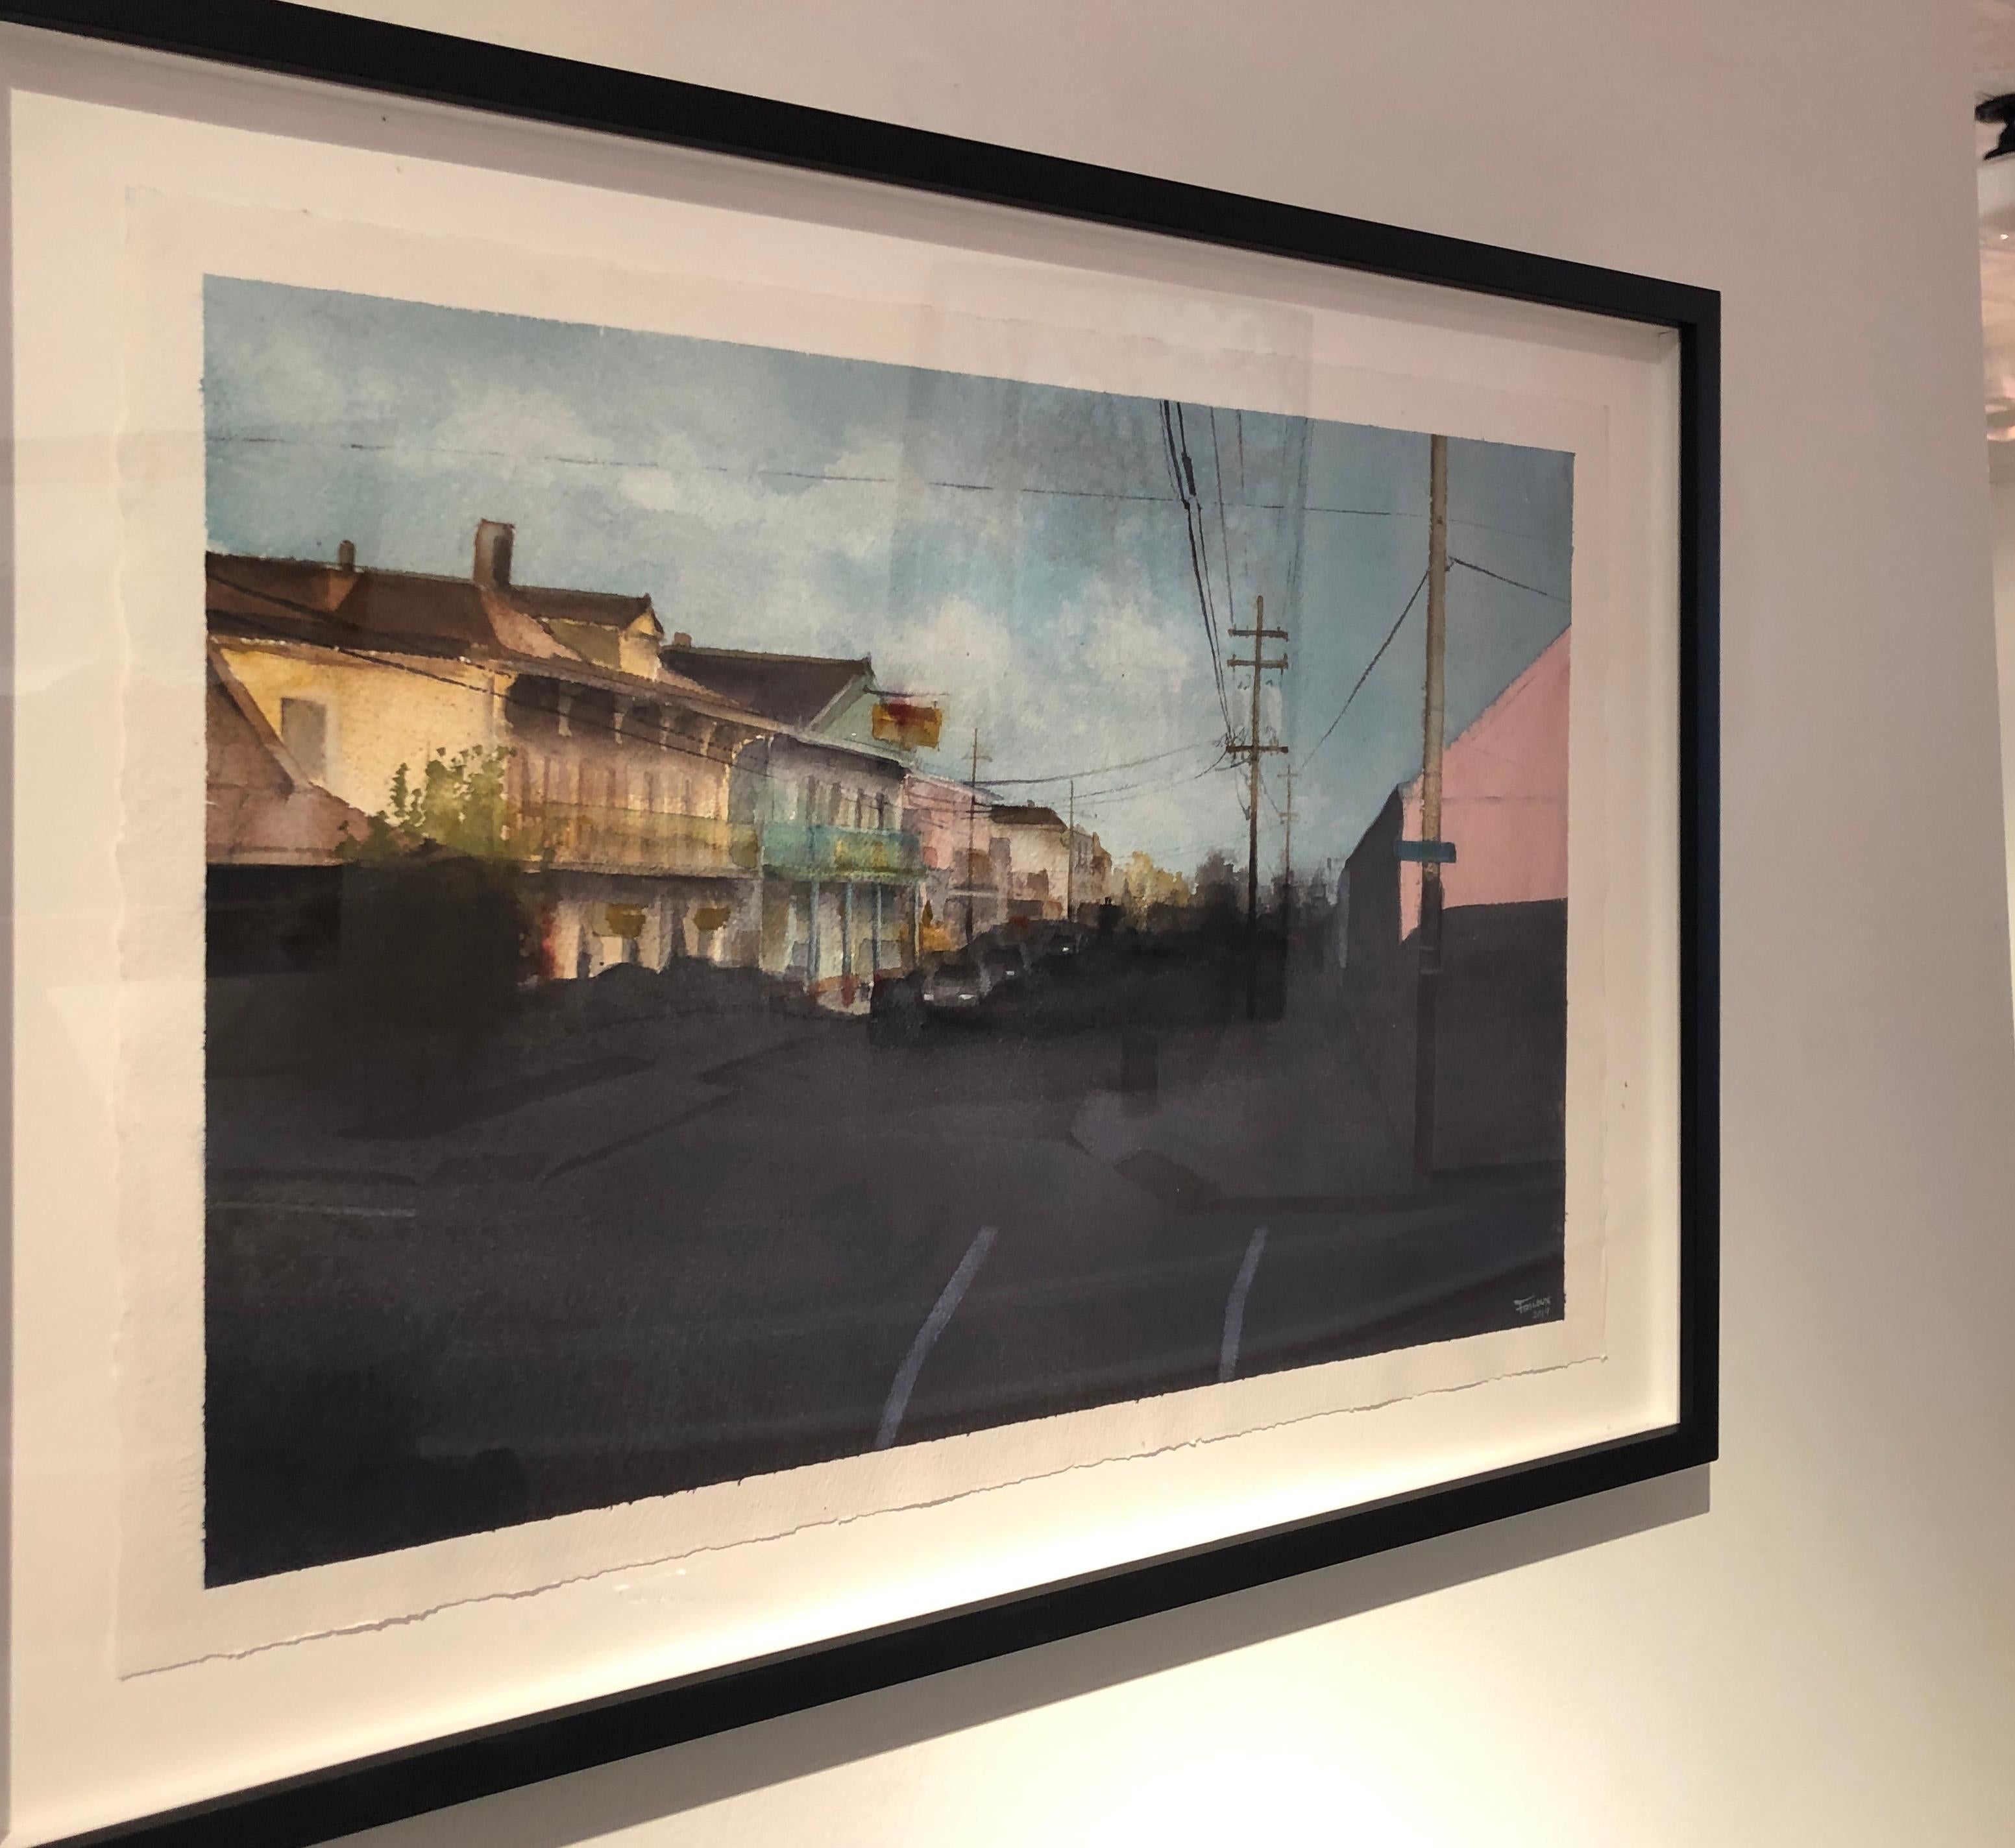 Watercolor on paper painting of street scene in New Orleans. FRAMED dimension are 19 x 26 1/2 inches. Well known for his PleinAir and Studio landscapes, Friloux is a Louisiana native living in New Orleans. In addition to watercolor he is